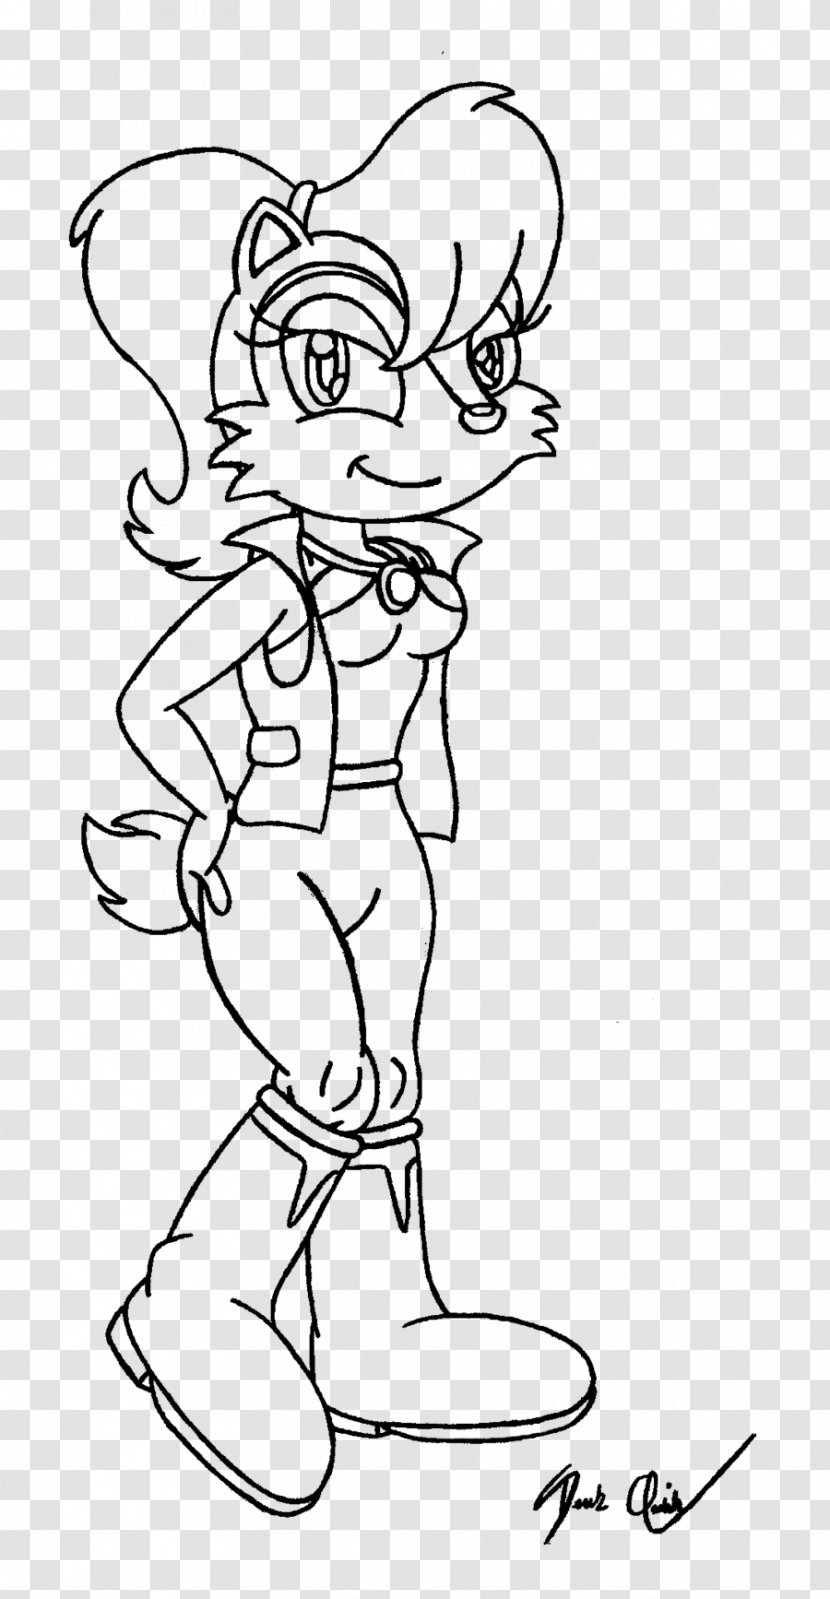 Princess Sally Acorn Sonic Adventure Coloring Book Shadow The Hedgehog Charmy Bee - Silhouette Transparent PNG